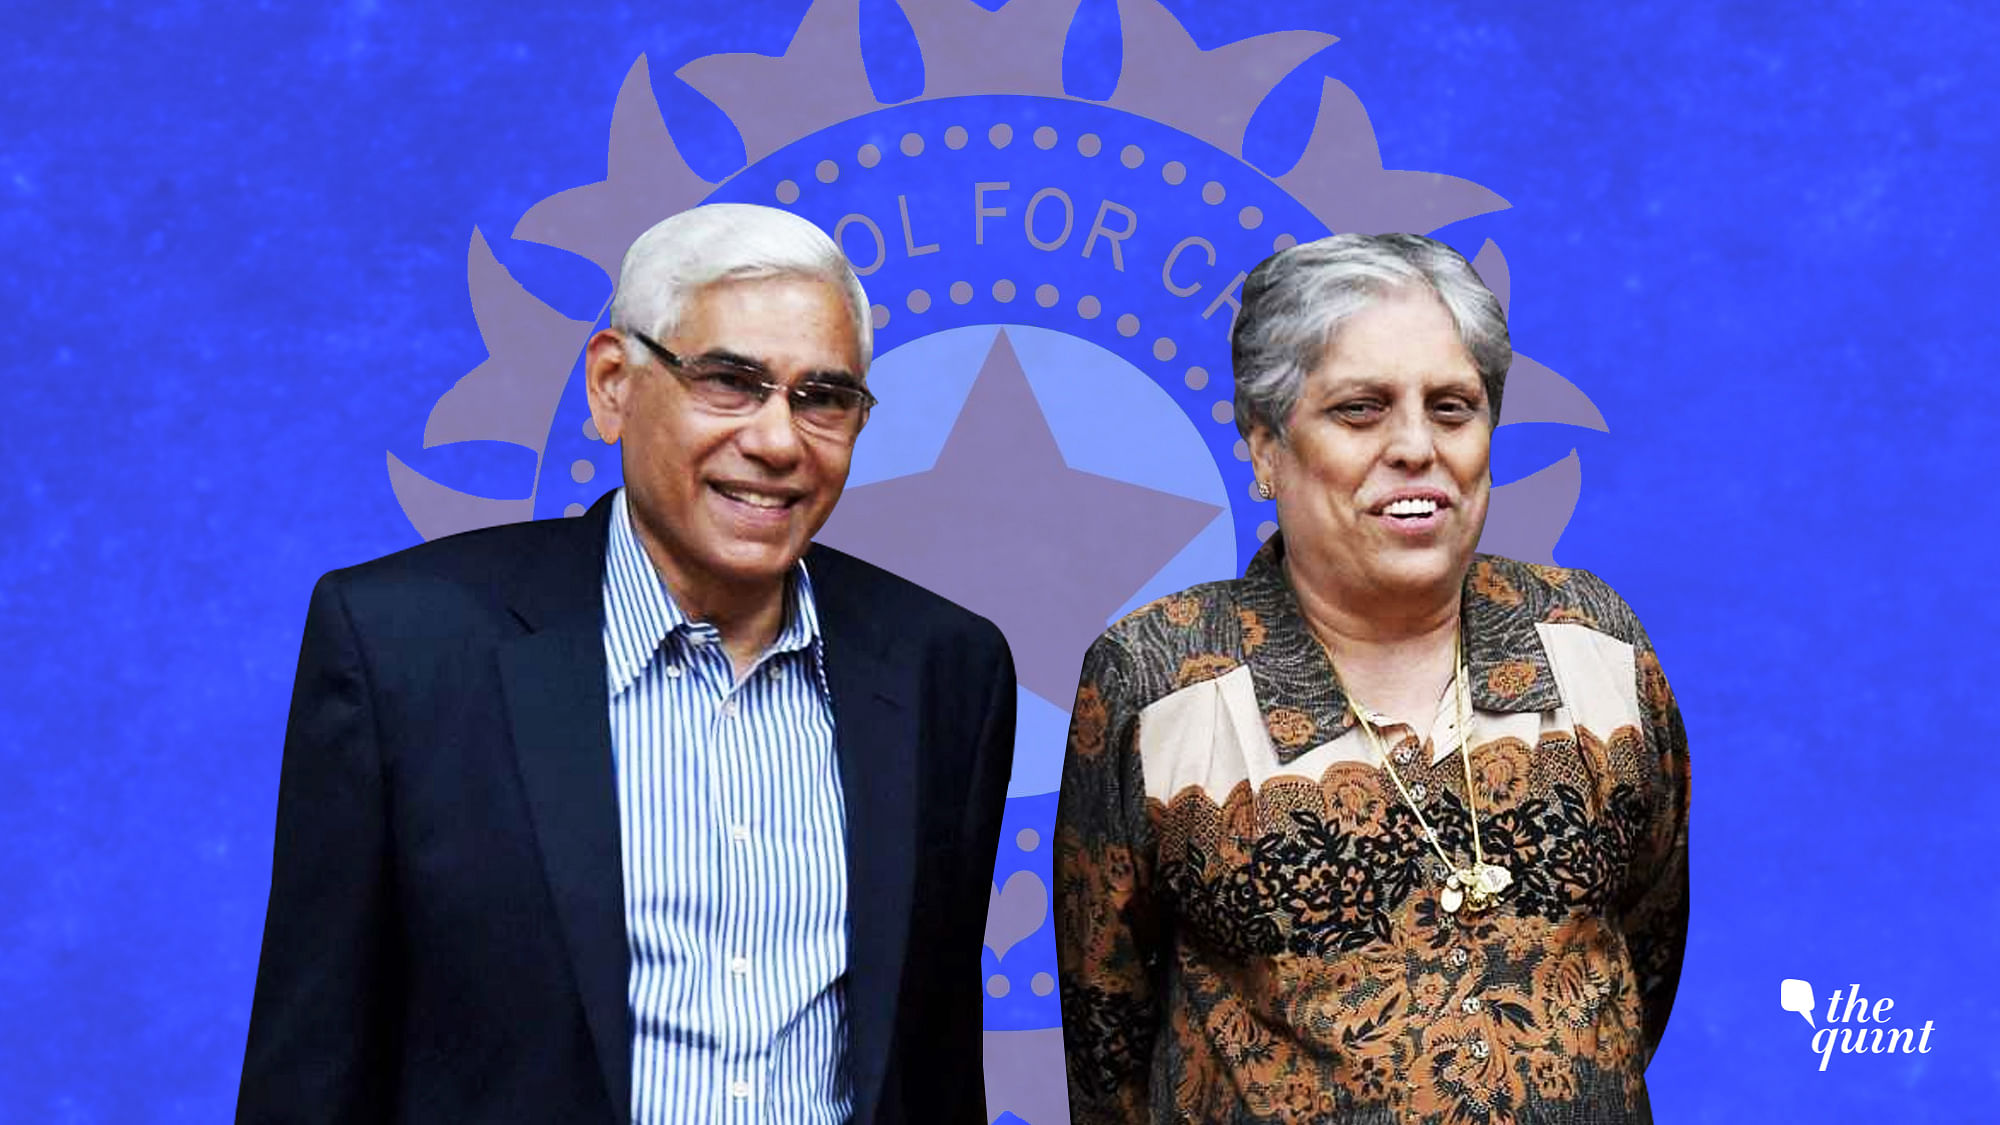 Vinod Rai and Diana Edulji’s failure to see eye to eye on any issue spells trouble for cricket in the country.